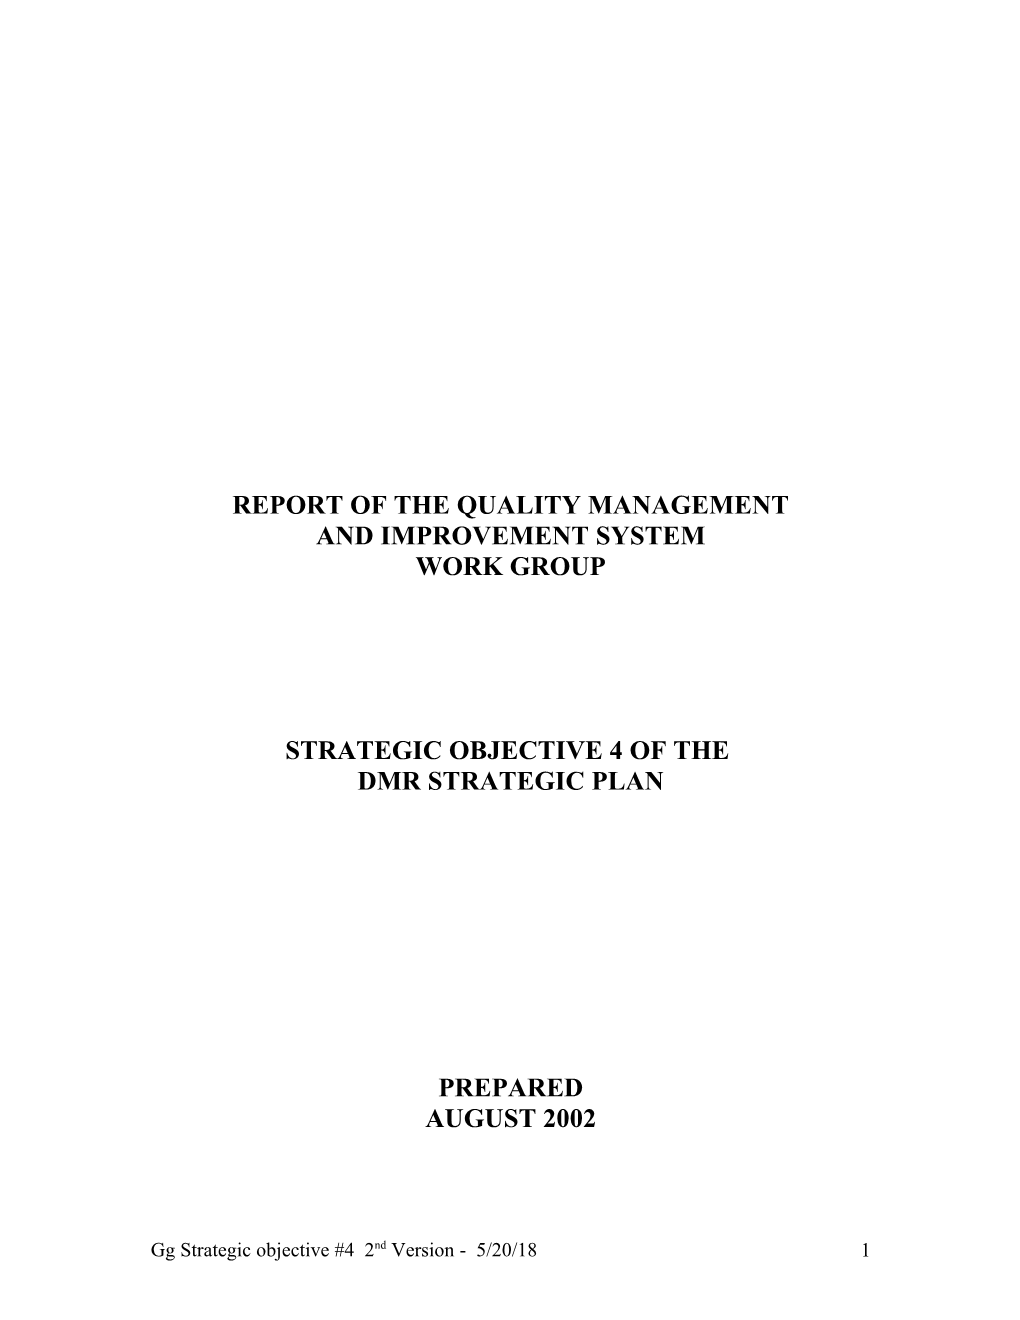 Report of the Quality Management